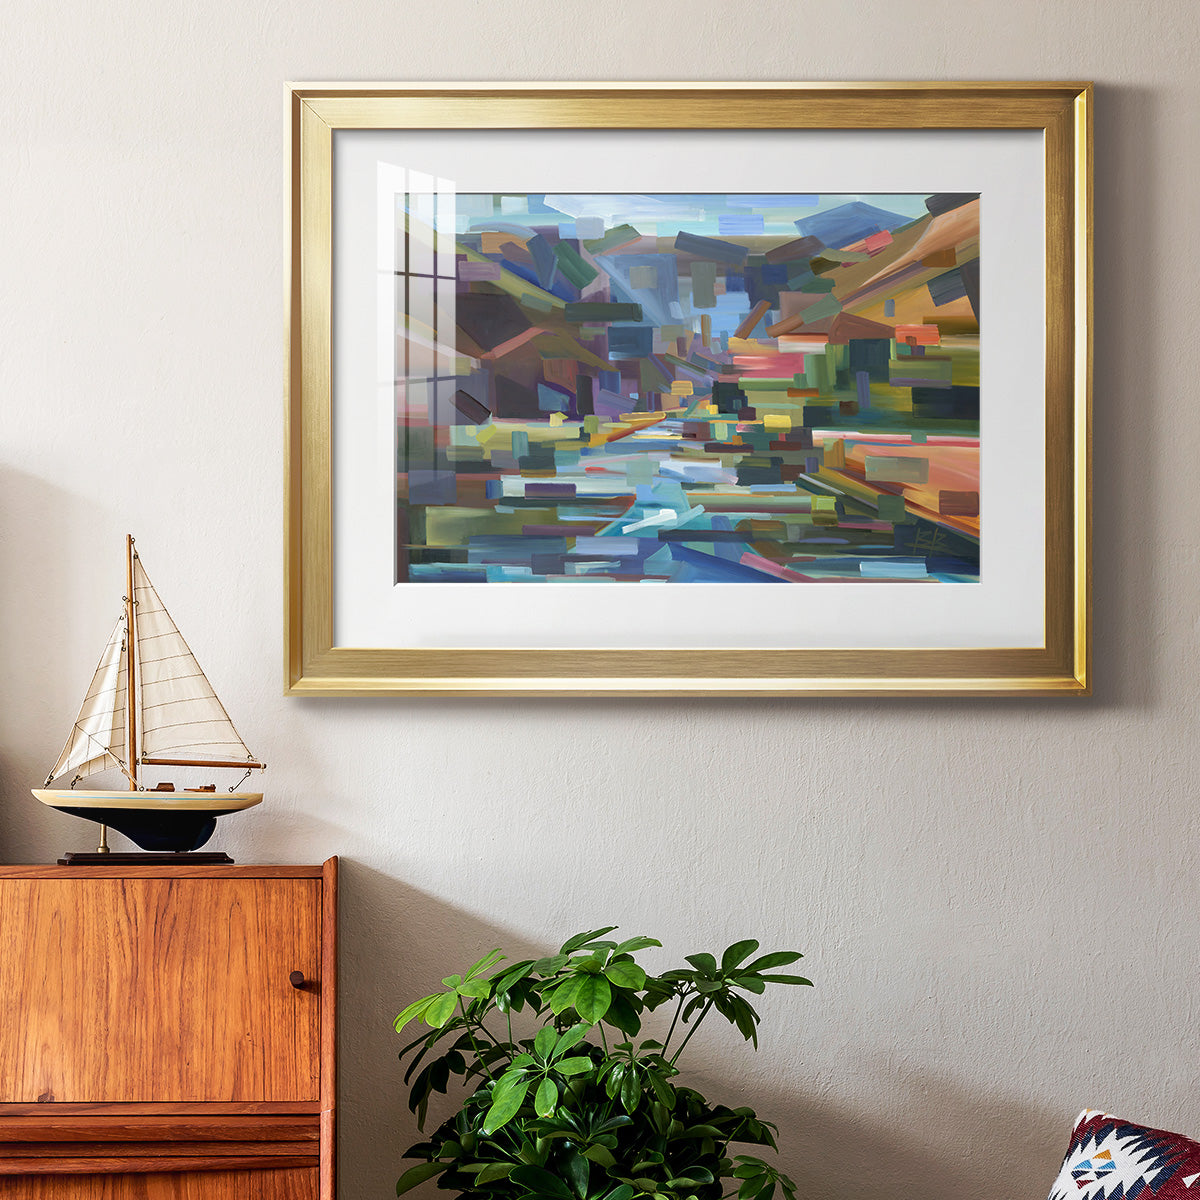 Pieces of Yakima Canyon Premium Framed Print - Ready to Hang